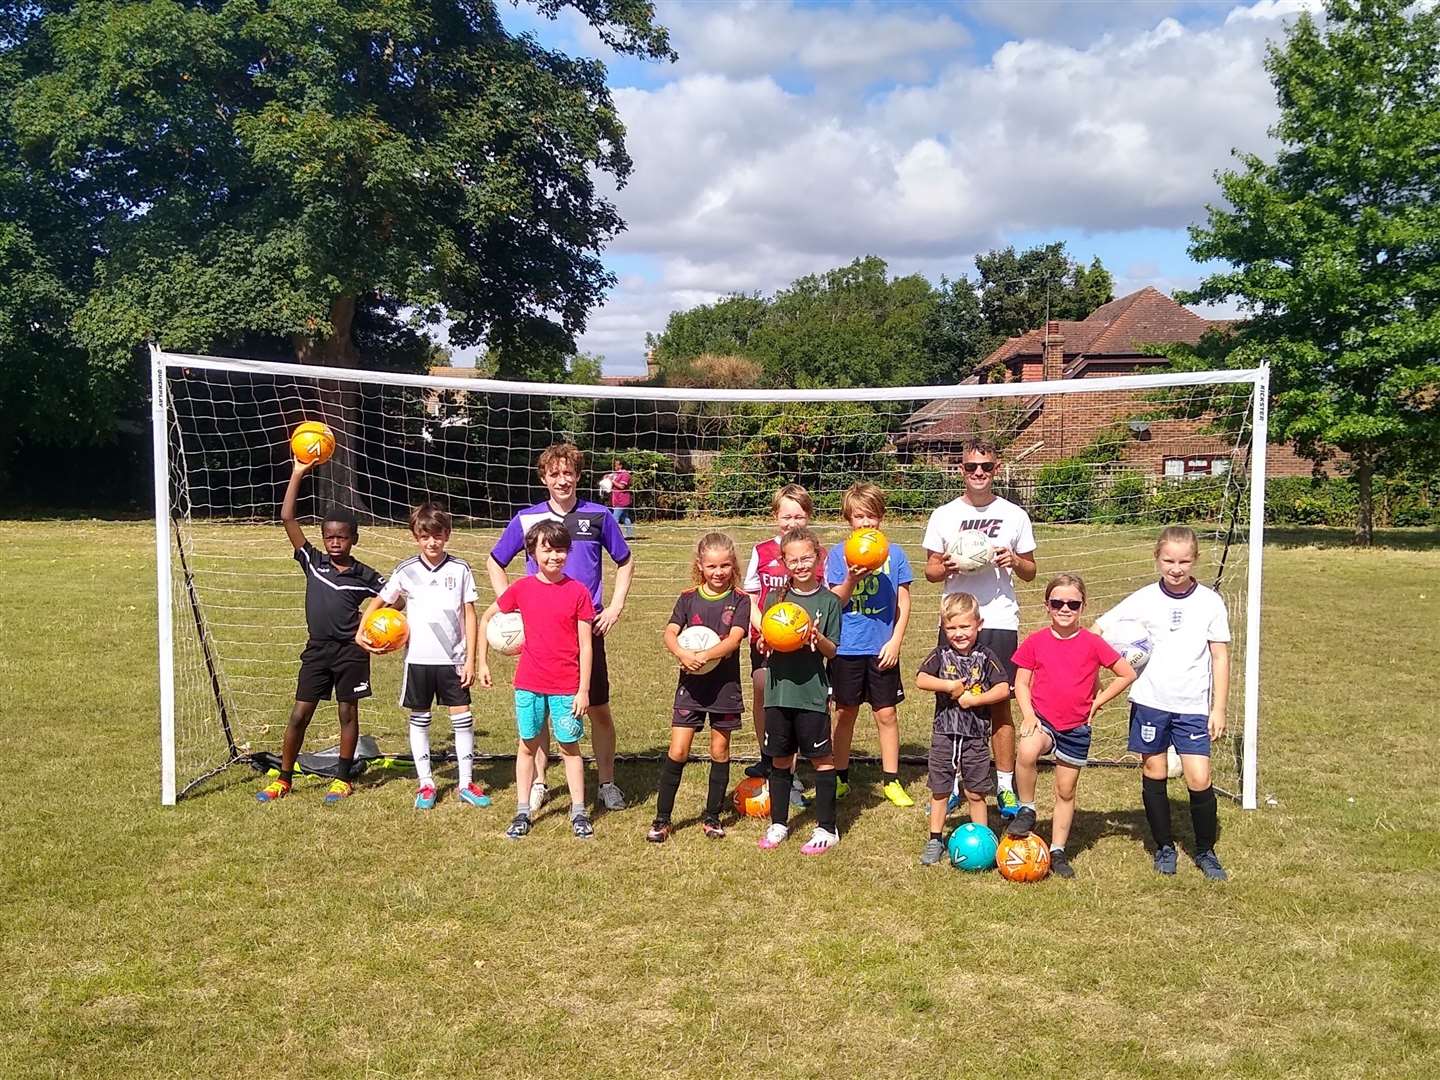 The council provided weekly free football sessions throughout the summer at Rainham Rec. Picture: Cllr Martin Potter